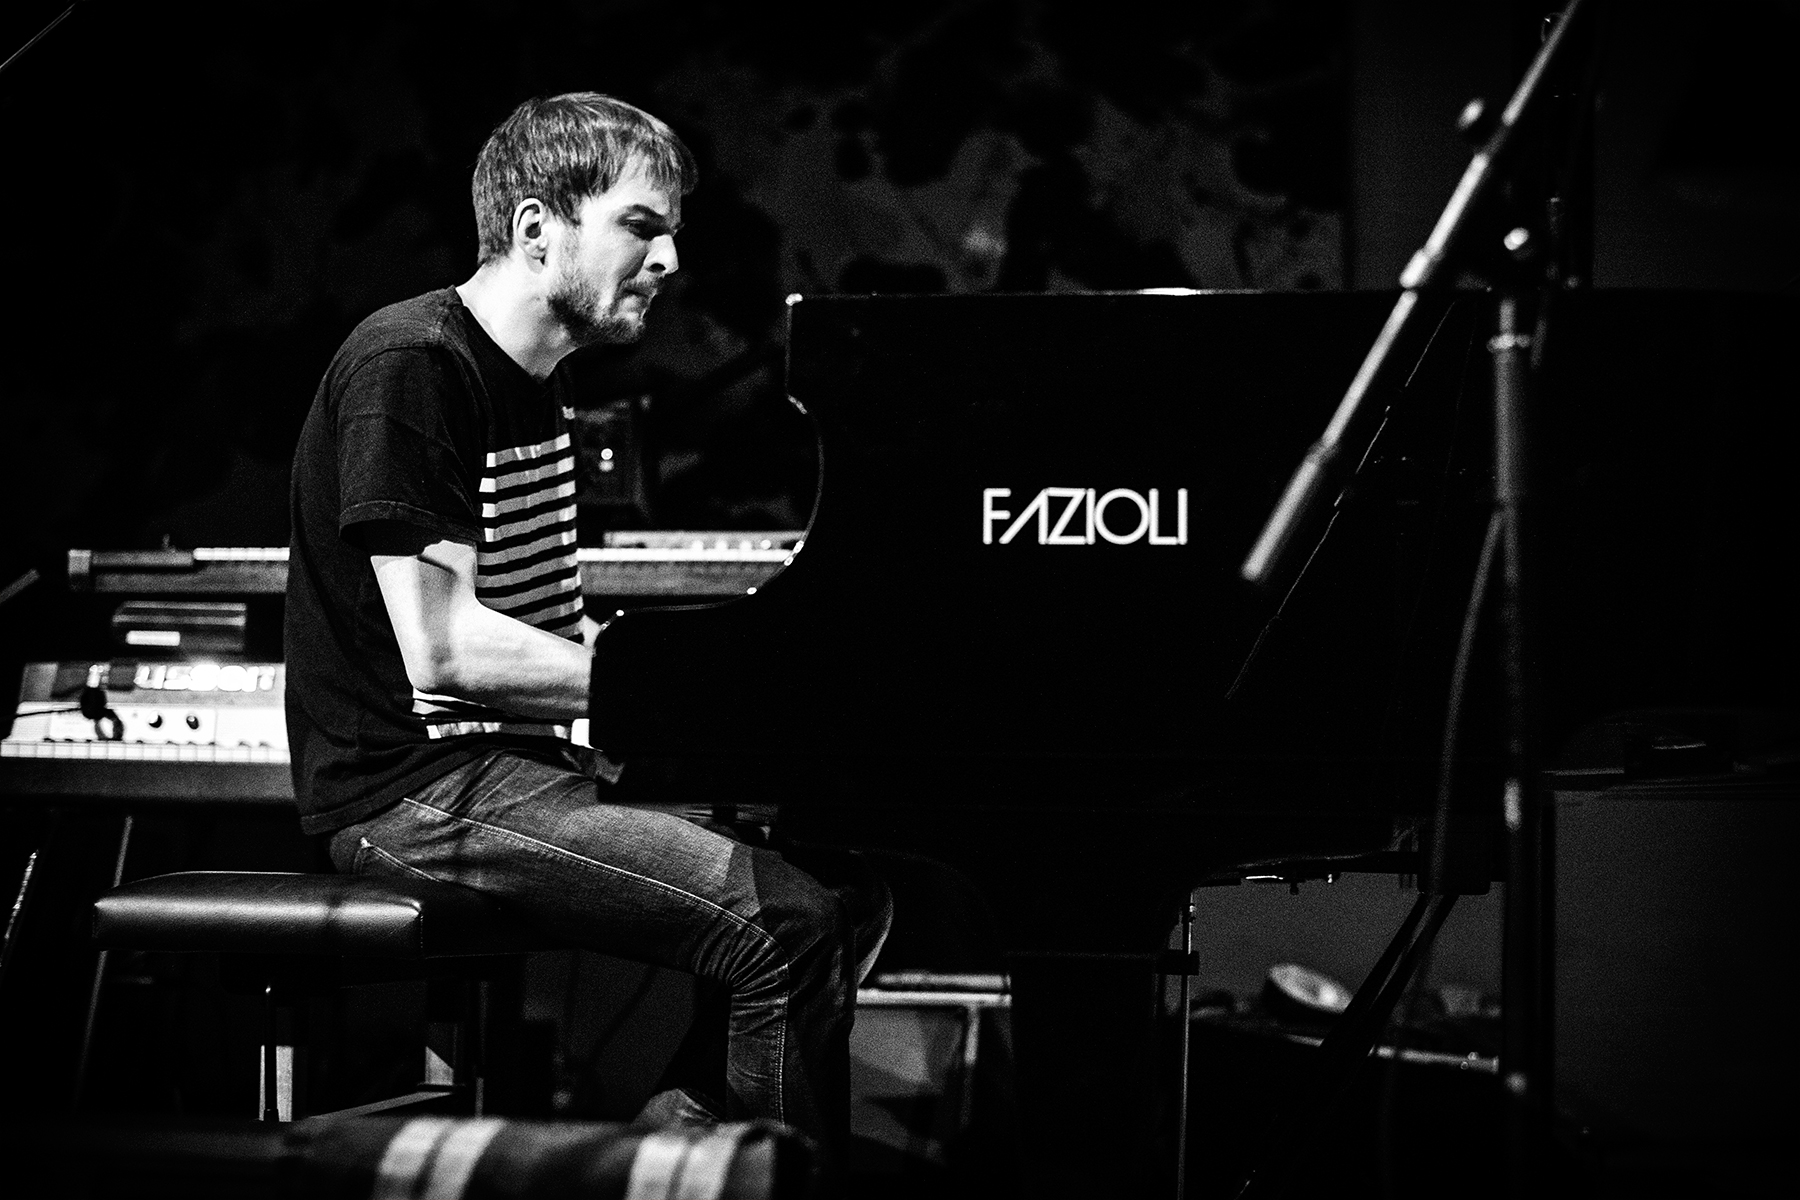 Live pictures and Portraits taken of Nils Frahm and Mikael Simpson while performing at FROST festival 2013, Louisiana